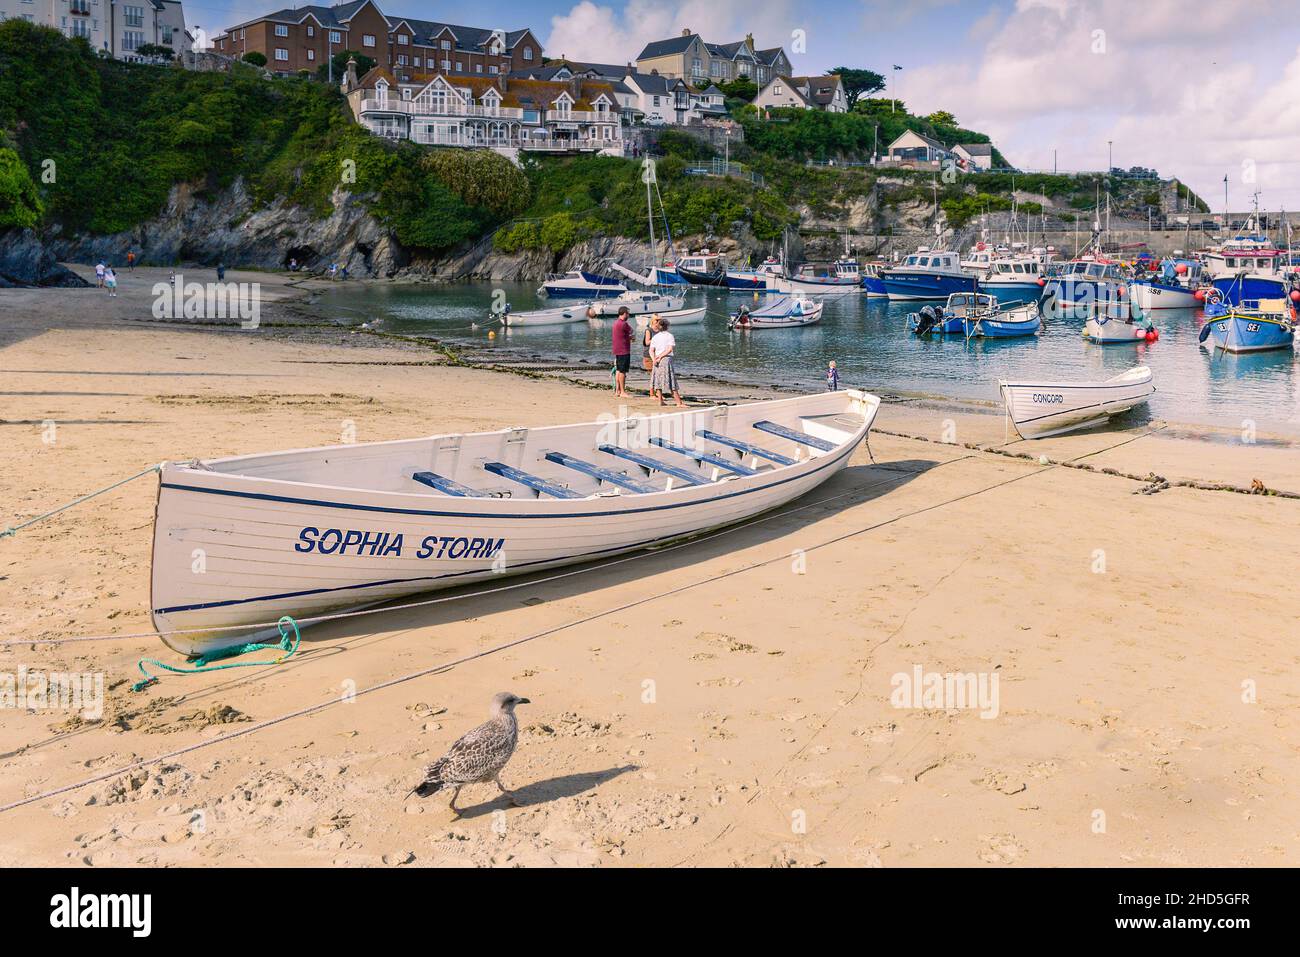 Traditional Cornish pilot gigs Sophia Storm and Concord beached on the beach in the historic picturesque working Newquay Harbour in Newquay in Cornwall. Stock Photo